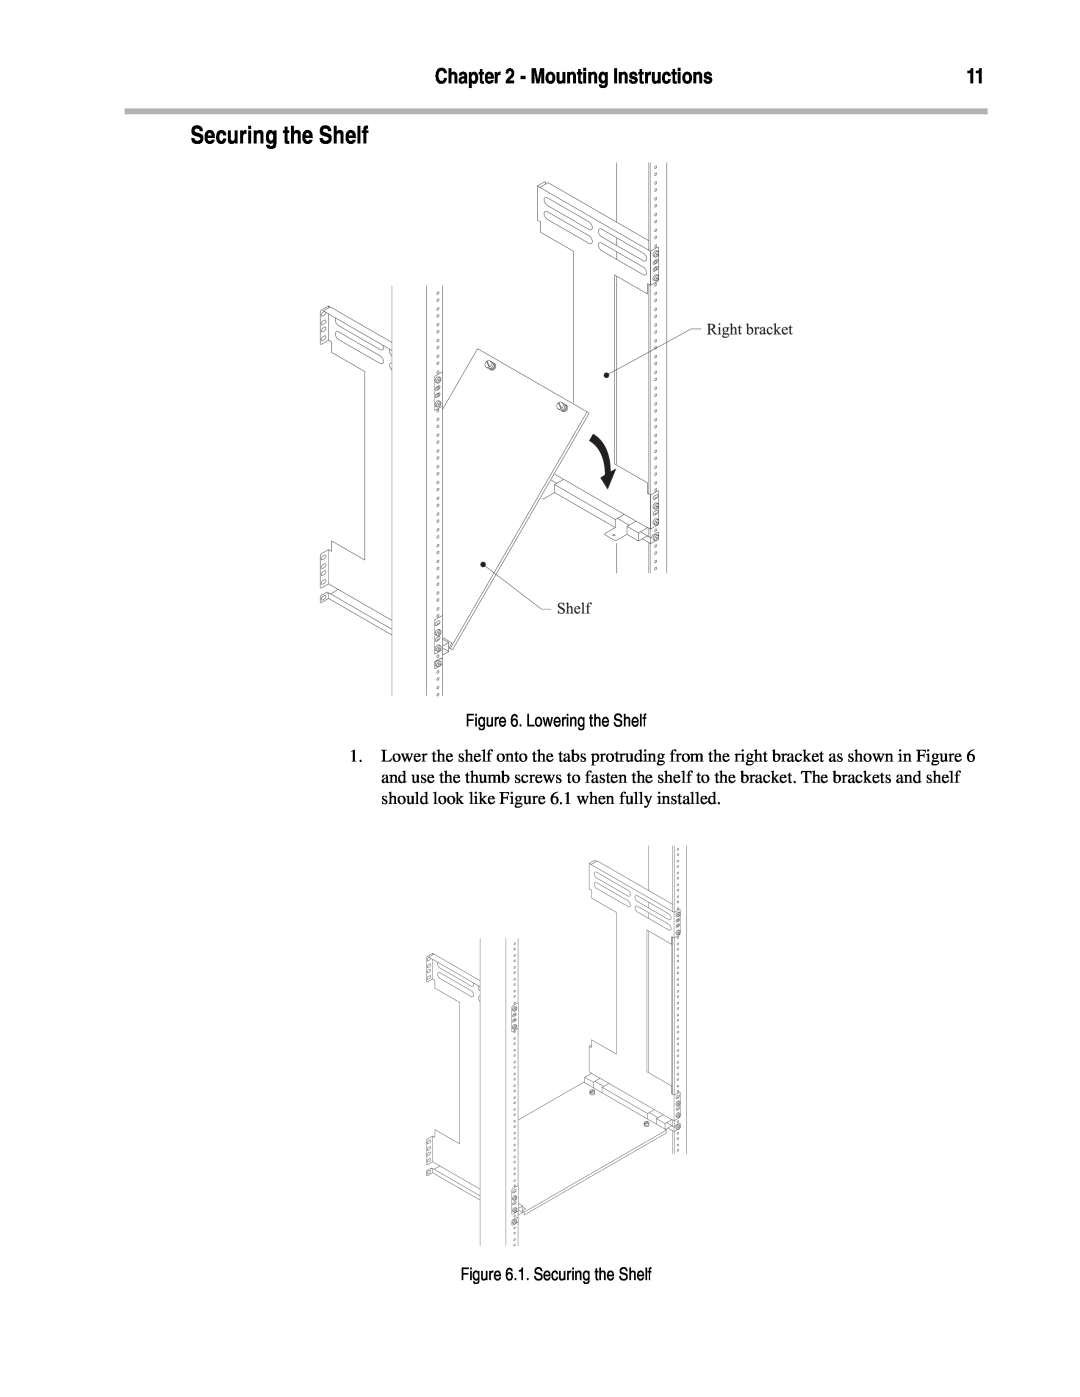 Compatible Systems Enterprise-8, A00-1869 manual Lowering the Shelf, 1. Securing the Shelf 